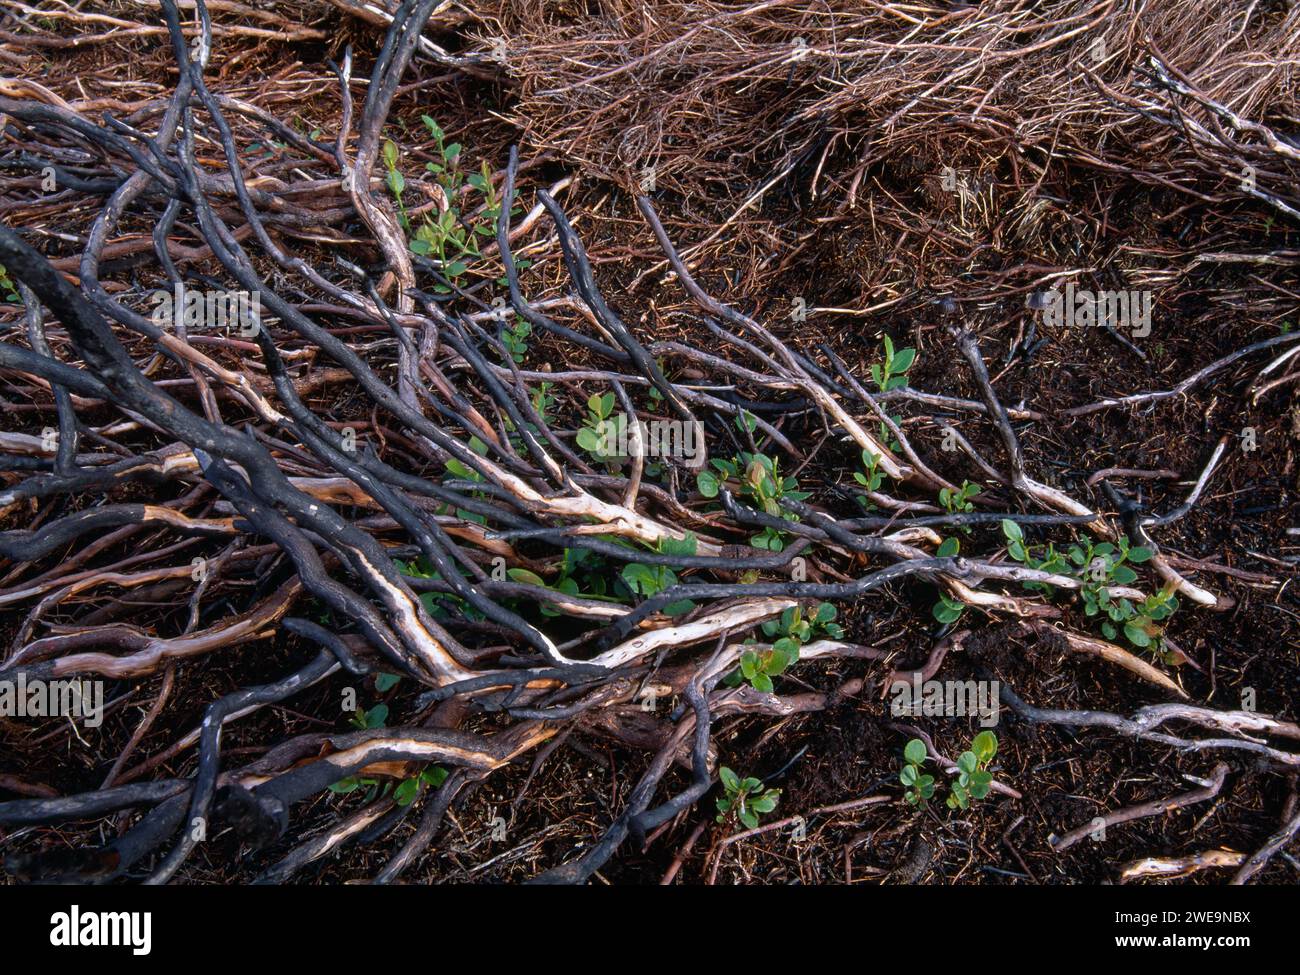 Ling Heather (Calluna vulgaris) charred stems of mature plant after controlled burning on a managed grouse moor with fresh regenerating shoots. Stock Photo